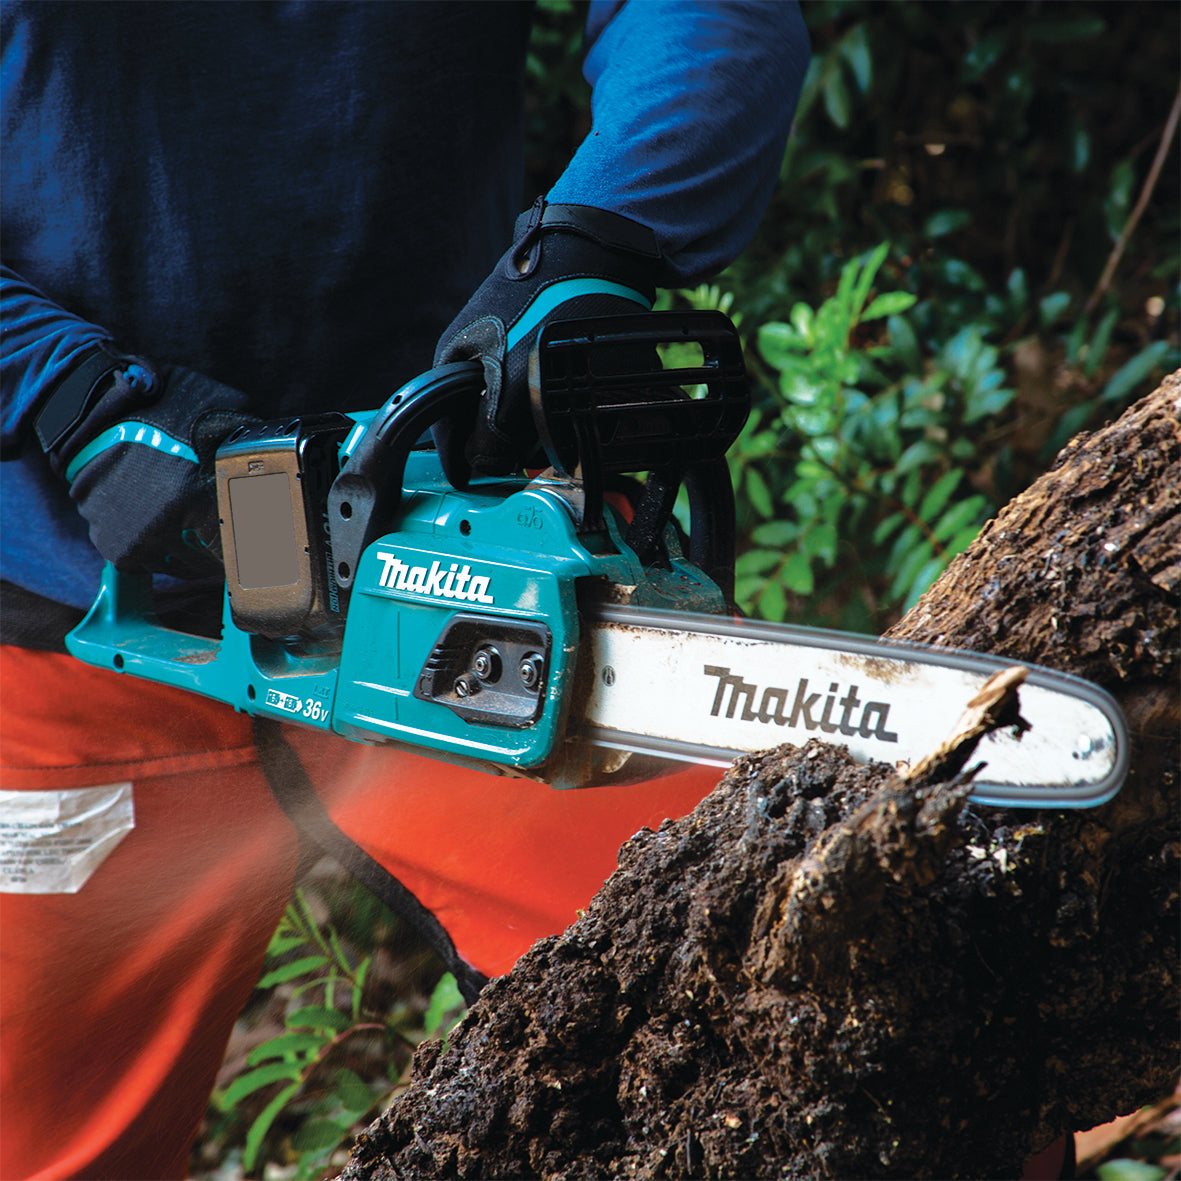 18Vx2 350mm 14" Brushless Chainsaw Bare (Tool Only) DUC355Z by Makita